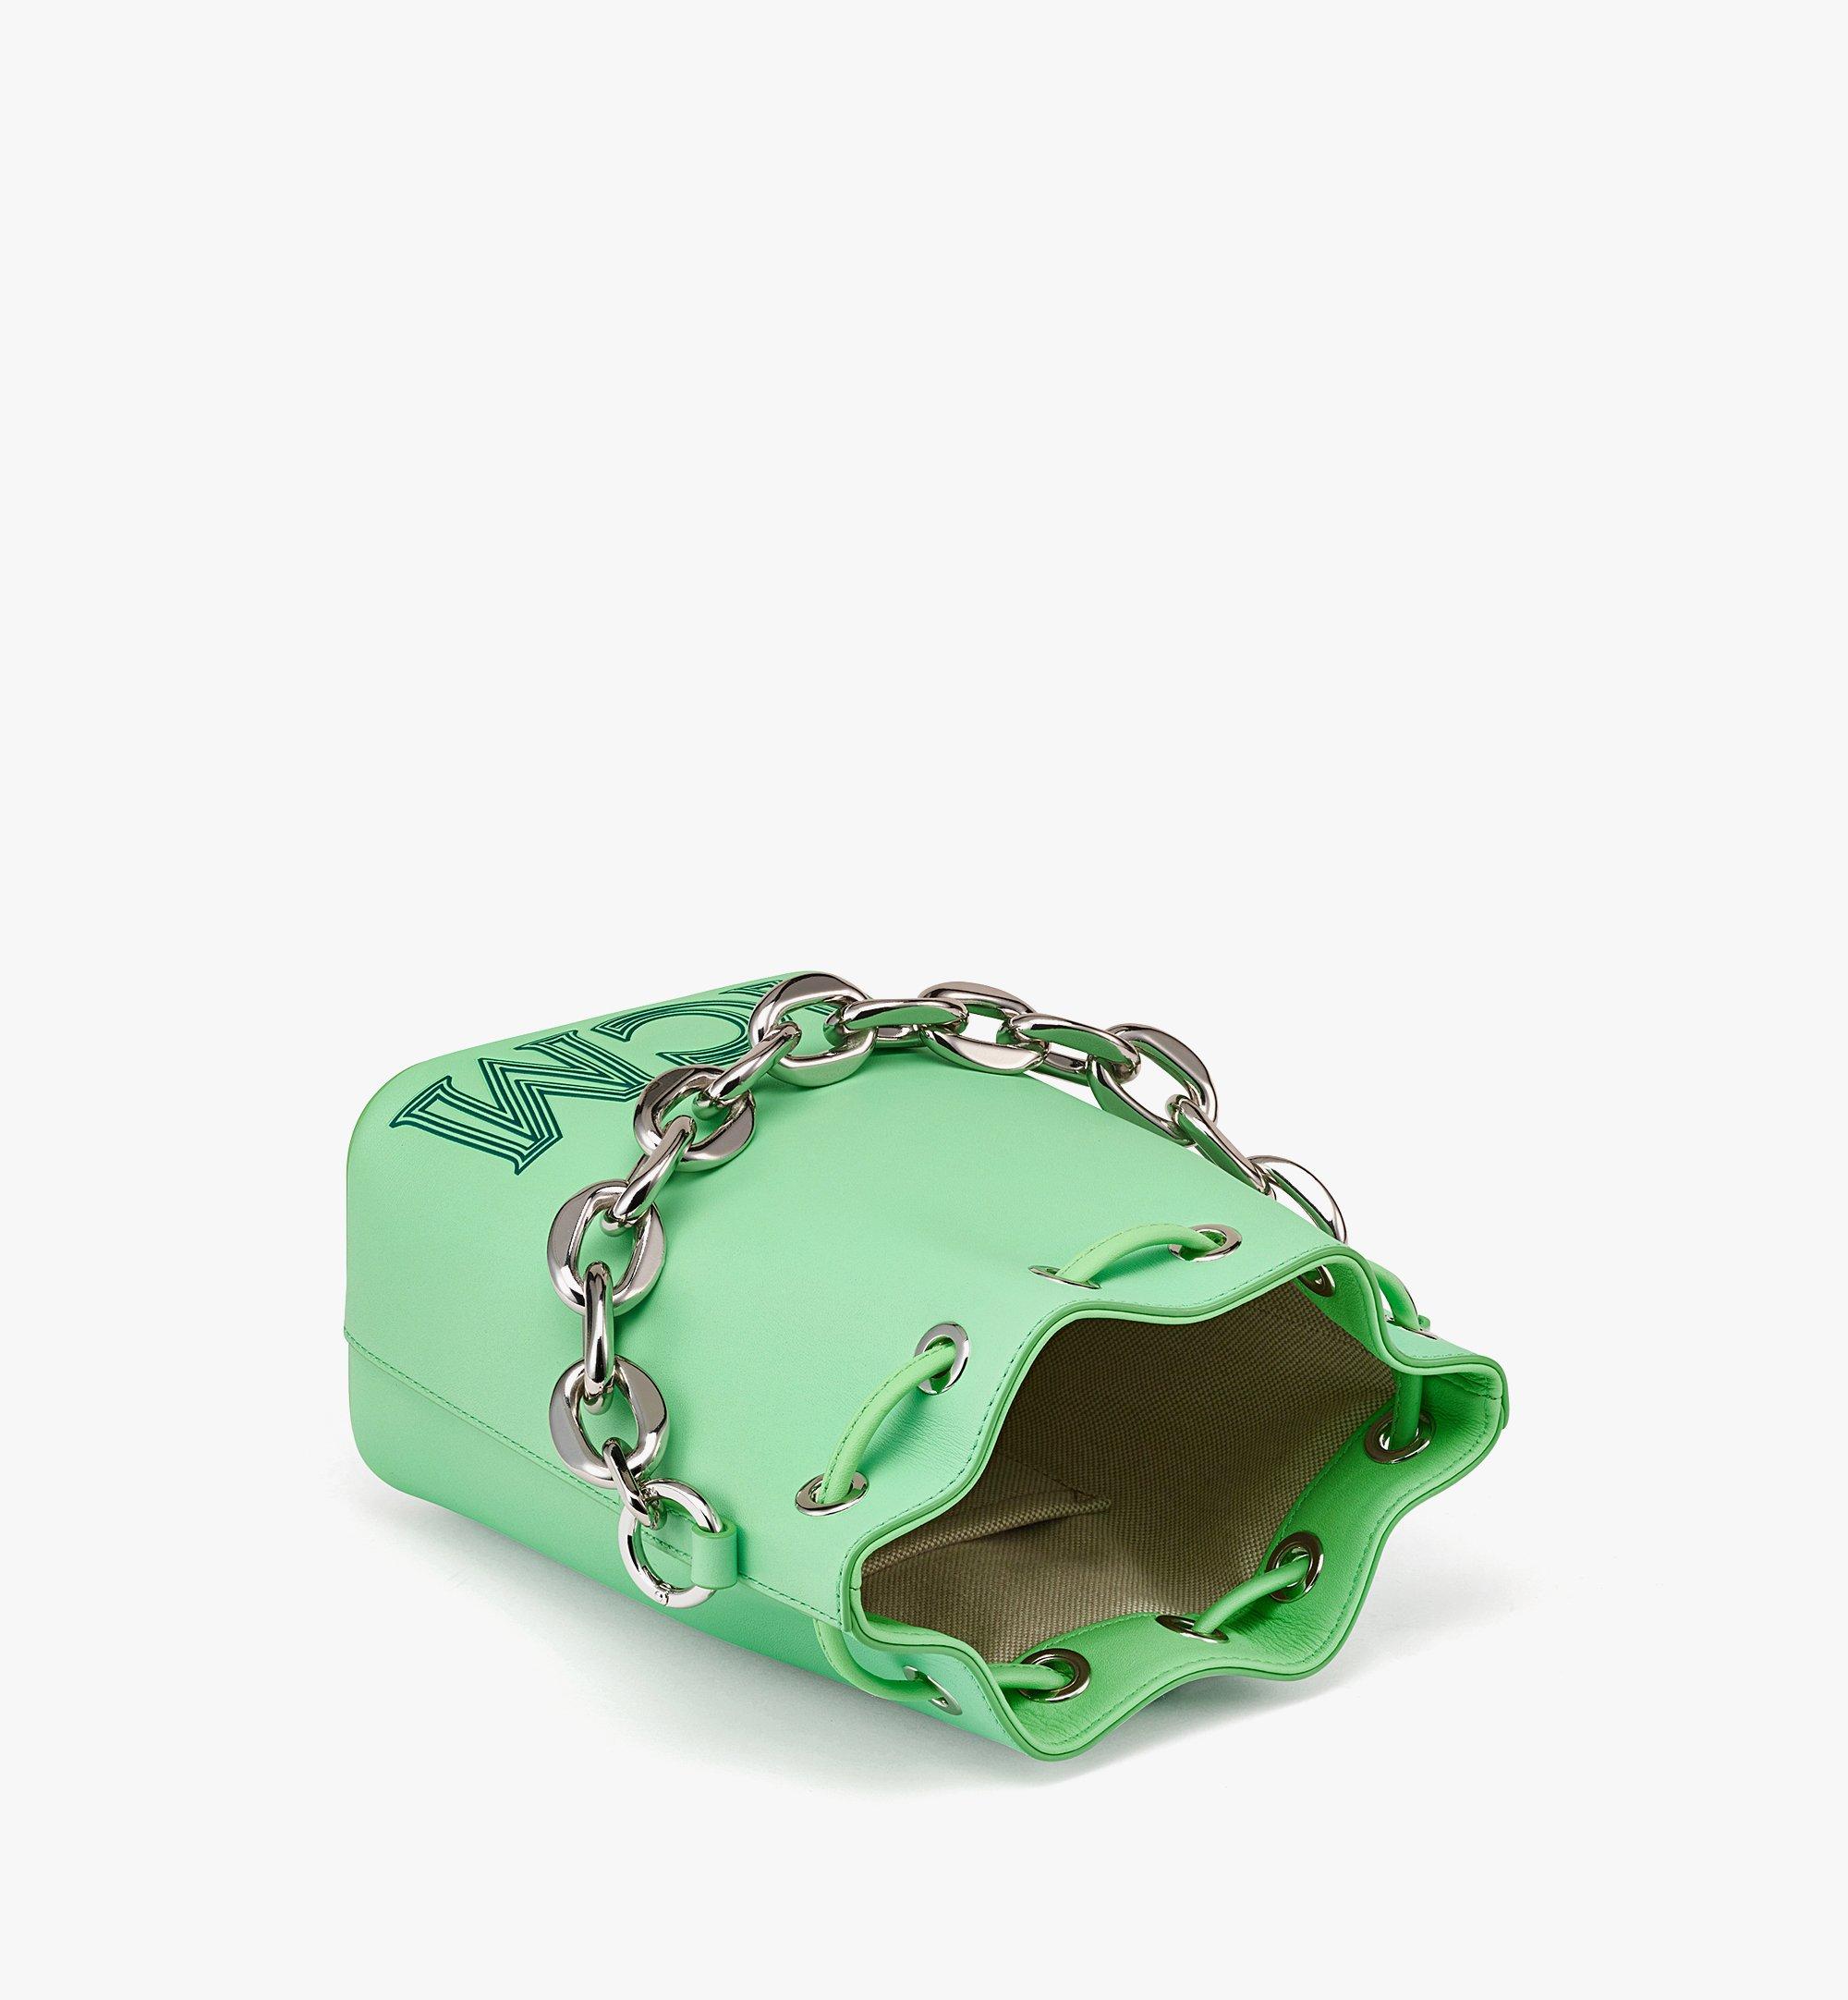 MCM Aren Drawstring Bag in Chain Leather Green MWDCSSX02JW001 Alternate View 2